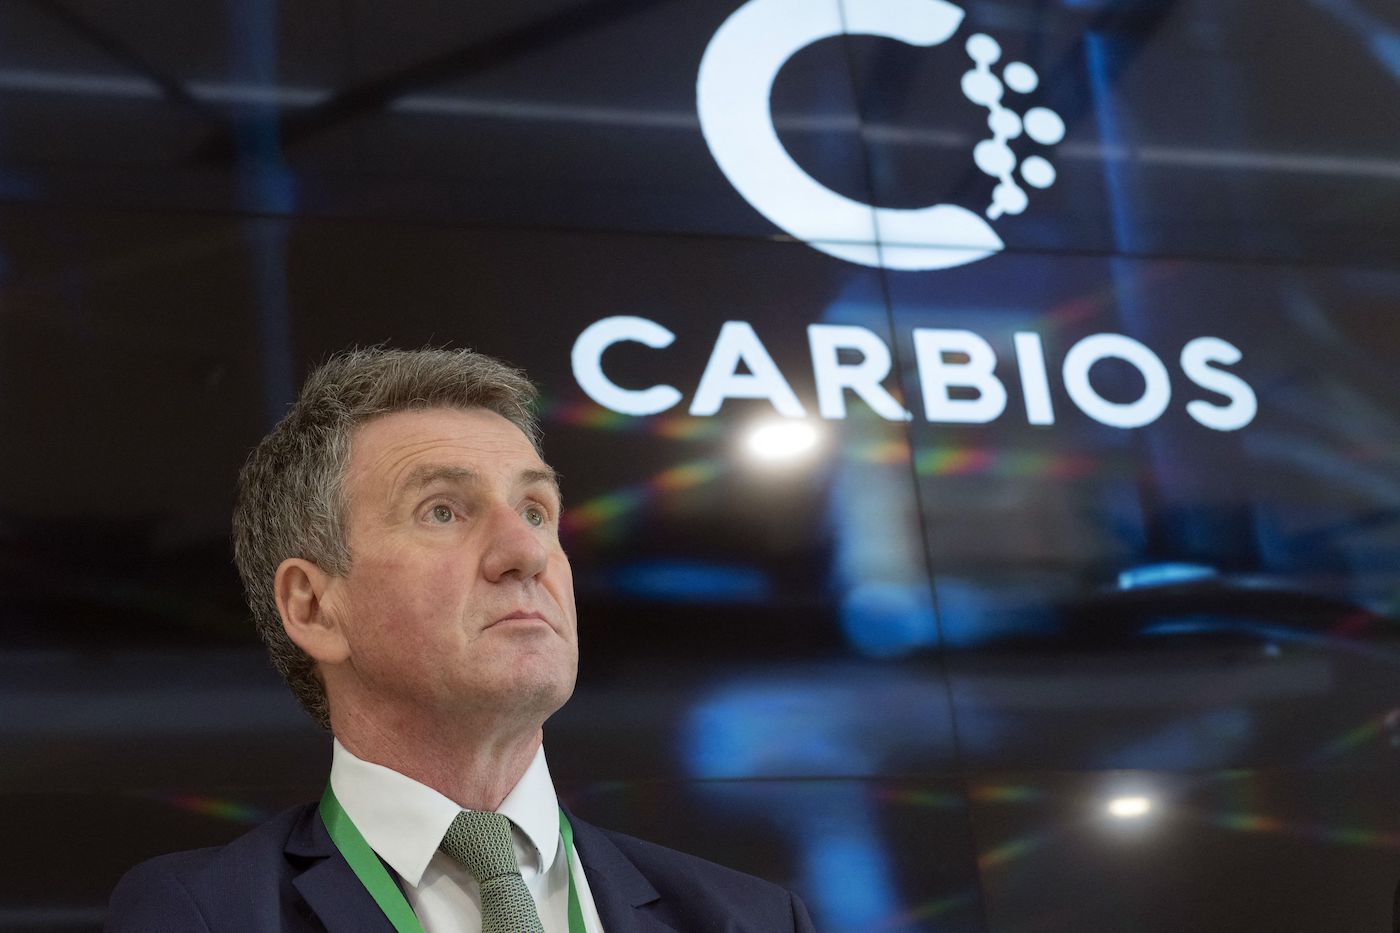 Alain Marty, scientific director of French biochemistry company Carbios is seen during the inauguration of Carbios' plant for the enzymatic recycling of PET plastic in Clermont-Ferrand on September 29, 2021.